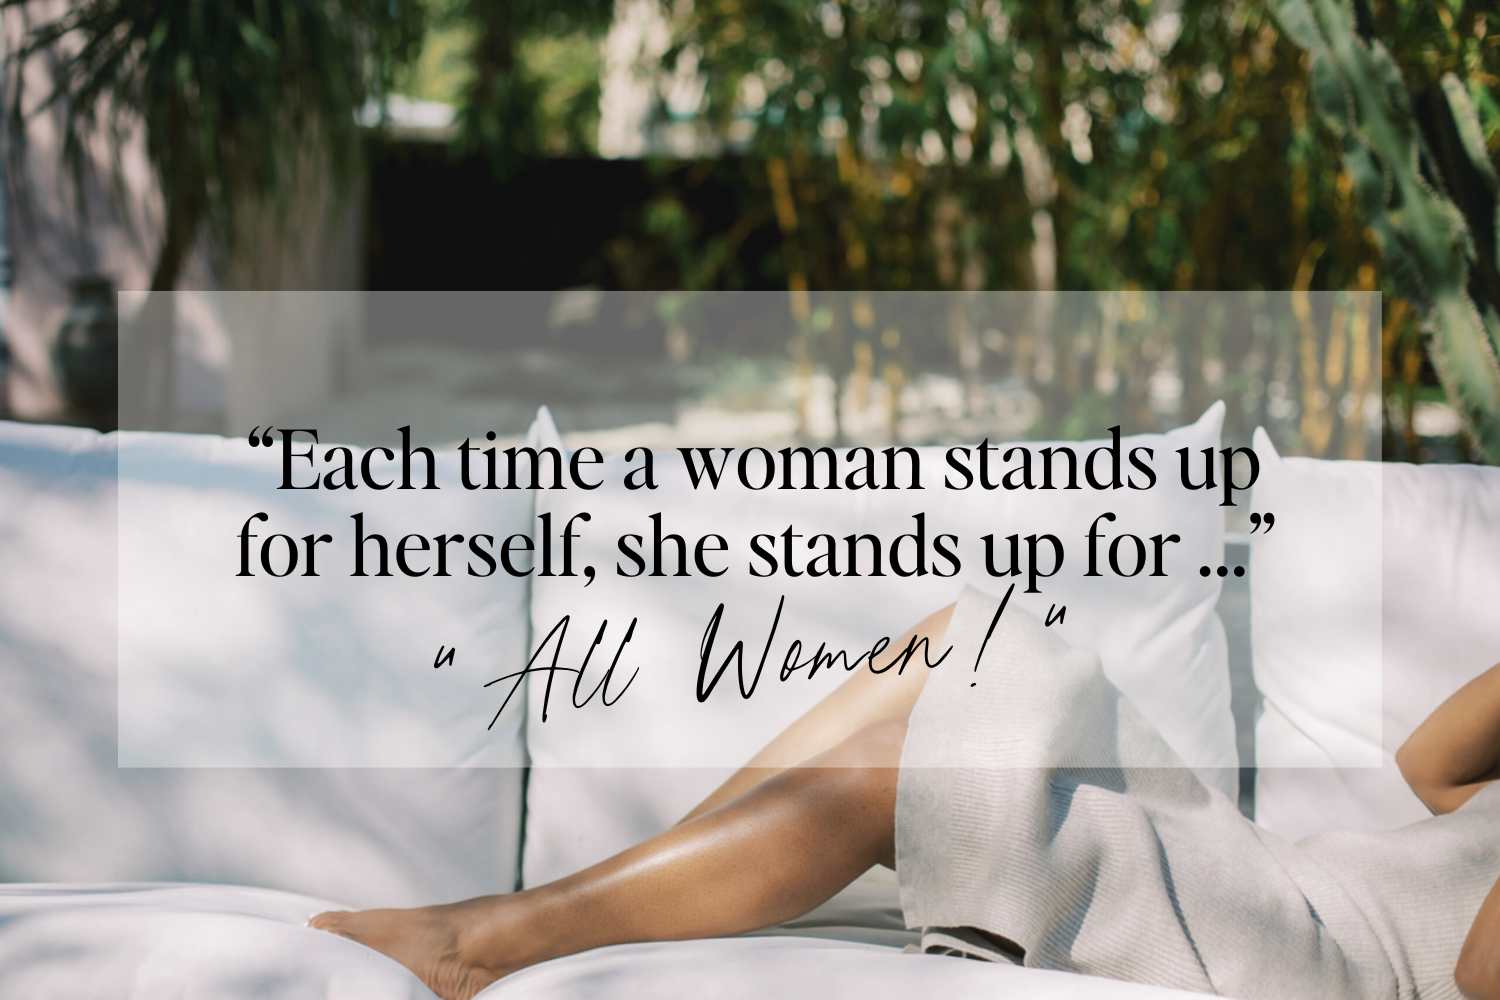 Motivational Confidence quote by Maya Angelou on a serene background with a woman lounging in a hammock, reading a book, the text reads: 'Each time a woman stands up for herself, she stands up for... All Women!'"